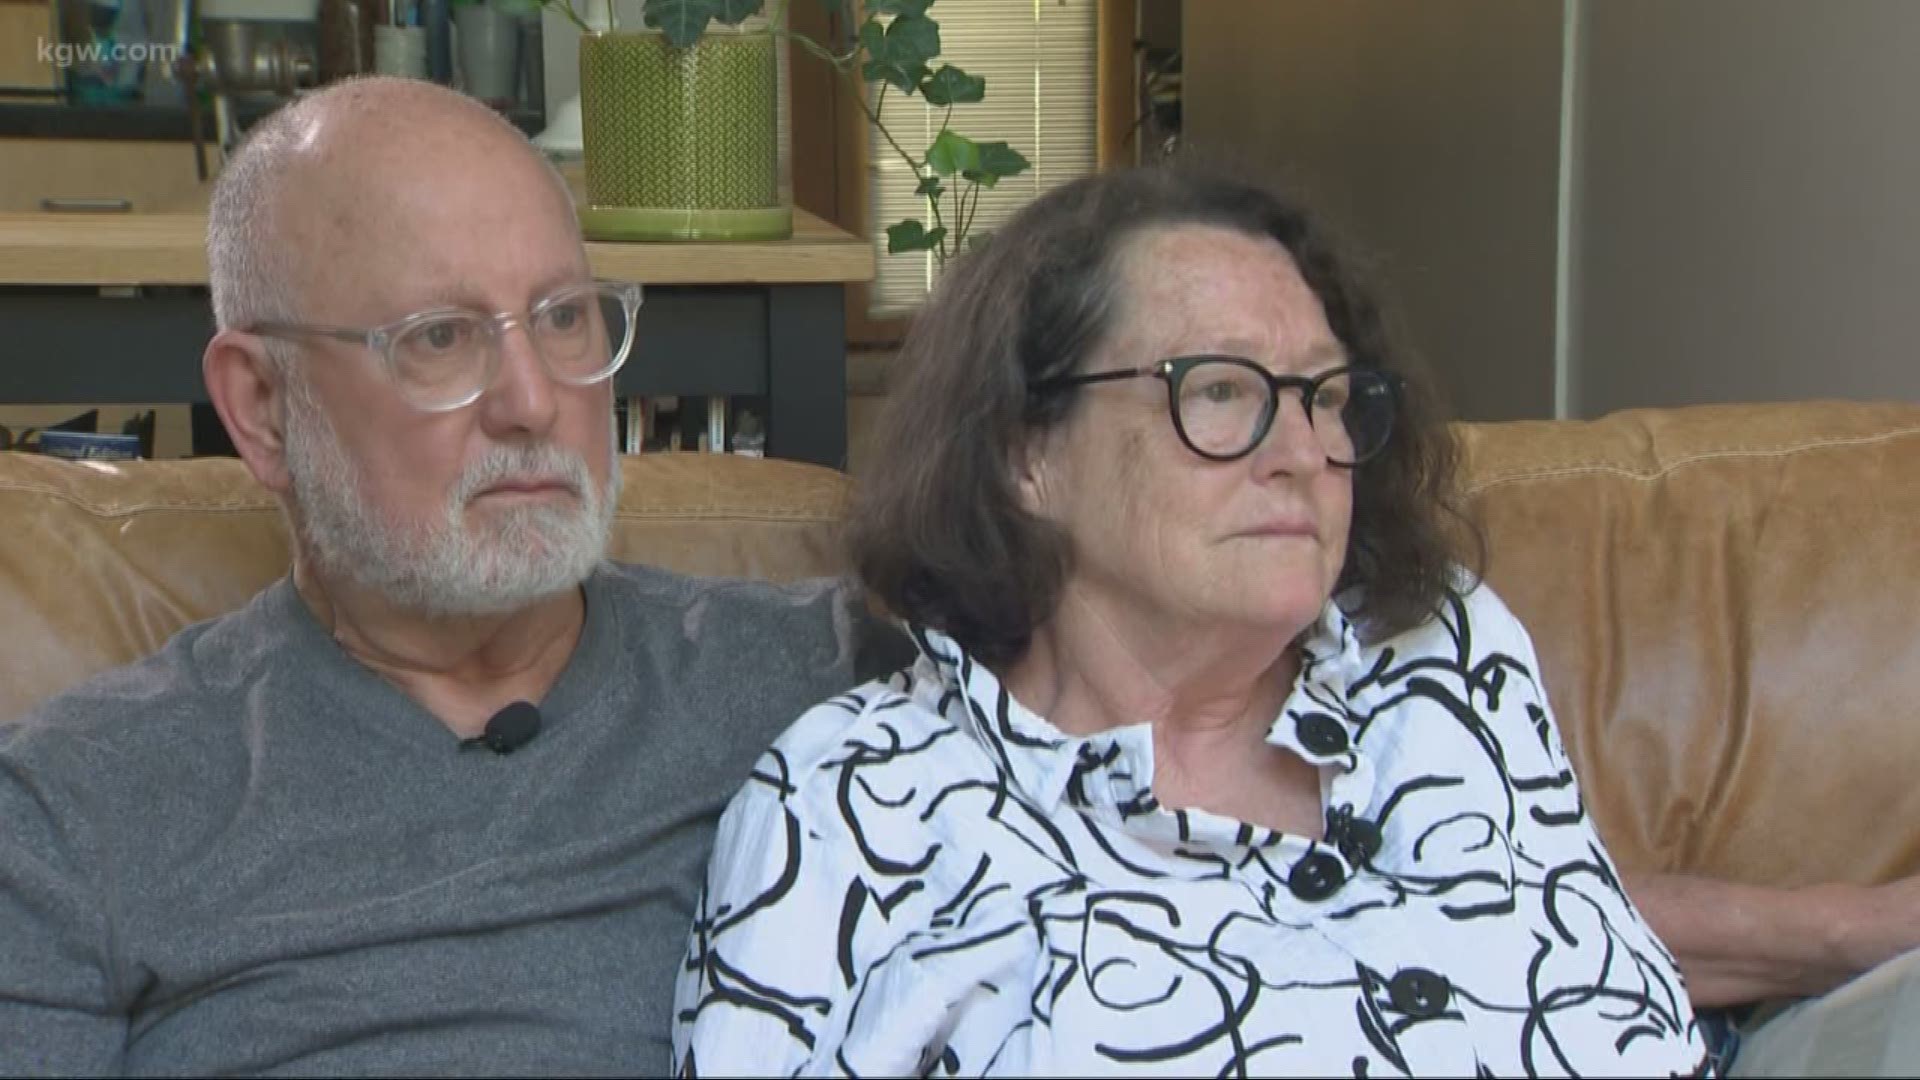 A Portland couple is suing the city of Seattle and King County over an attack that happened in 2016. The couple says police knew the man who attacked them was dangerous.